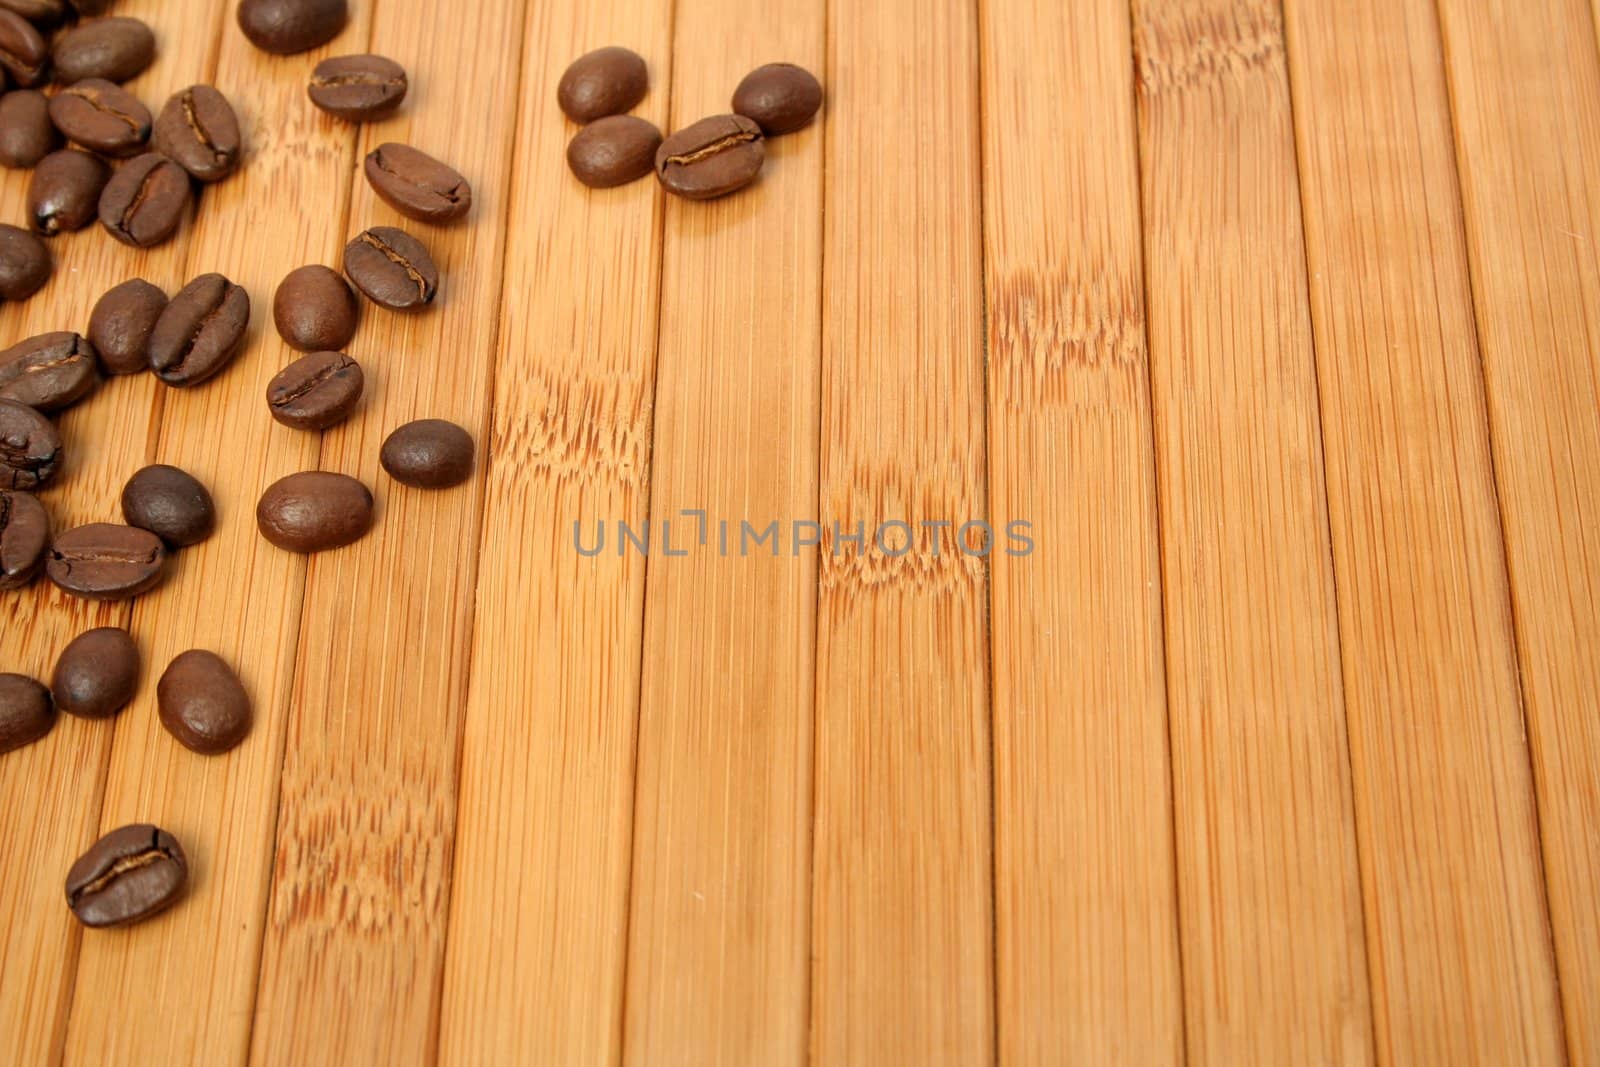 Grains of coffee on a carpet made of a bamboo 6